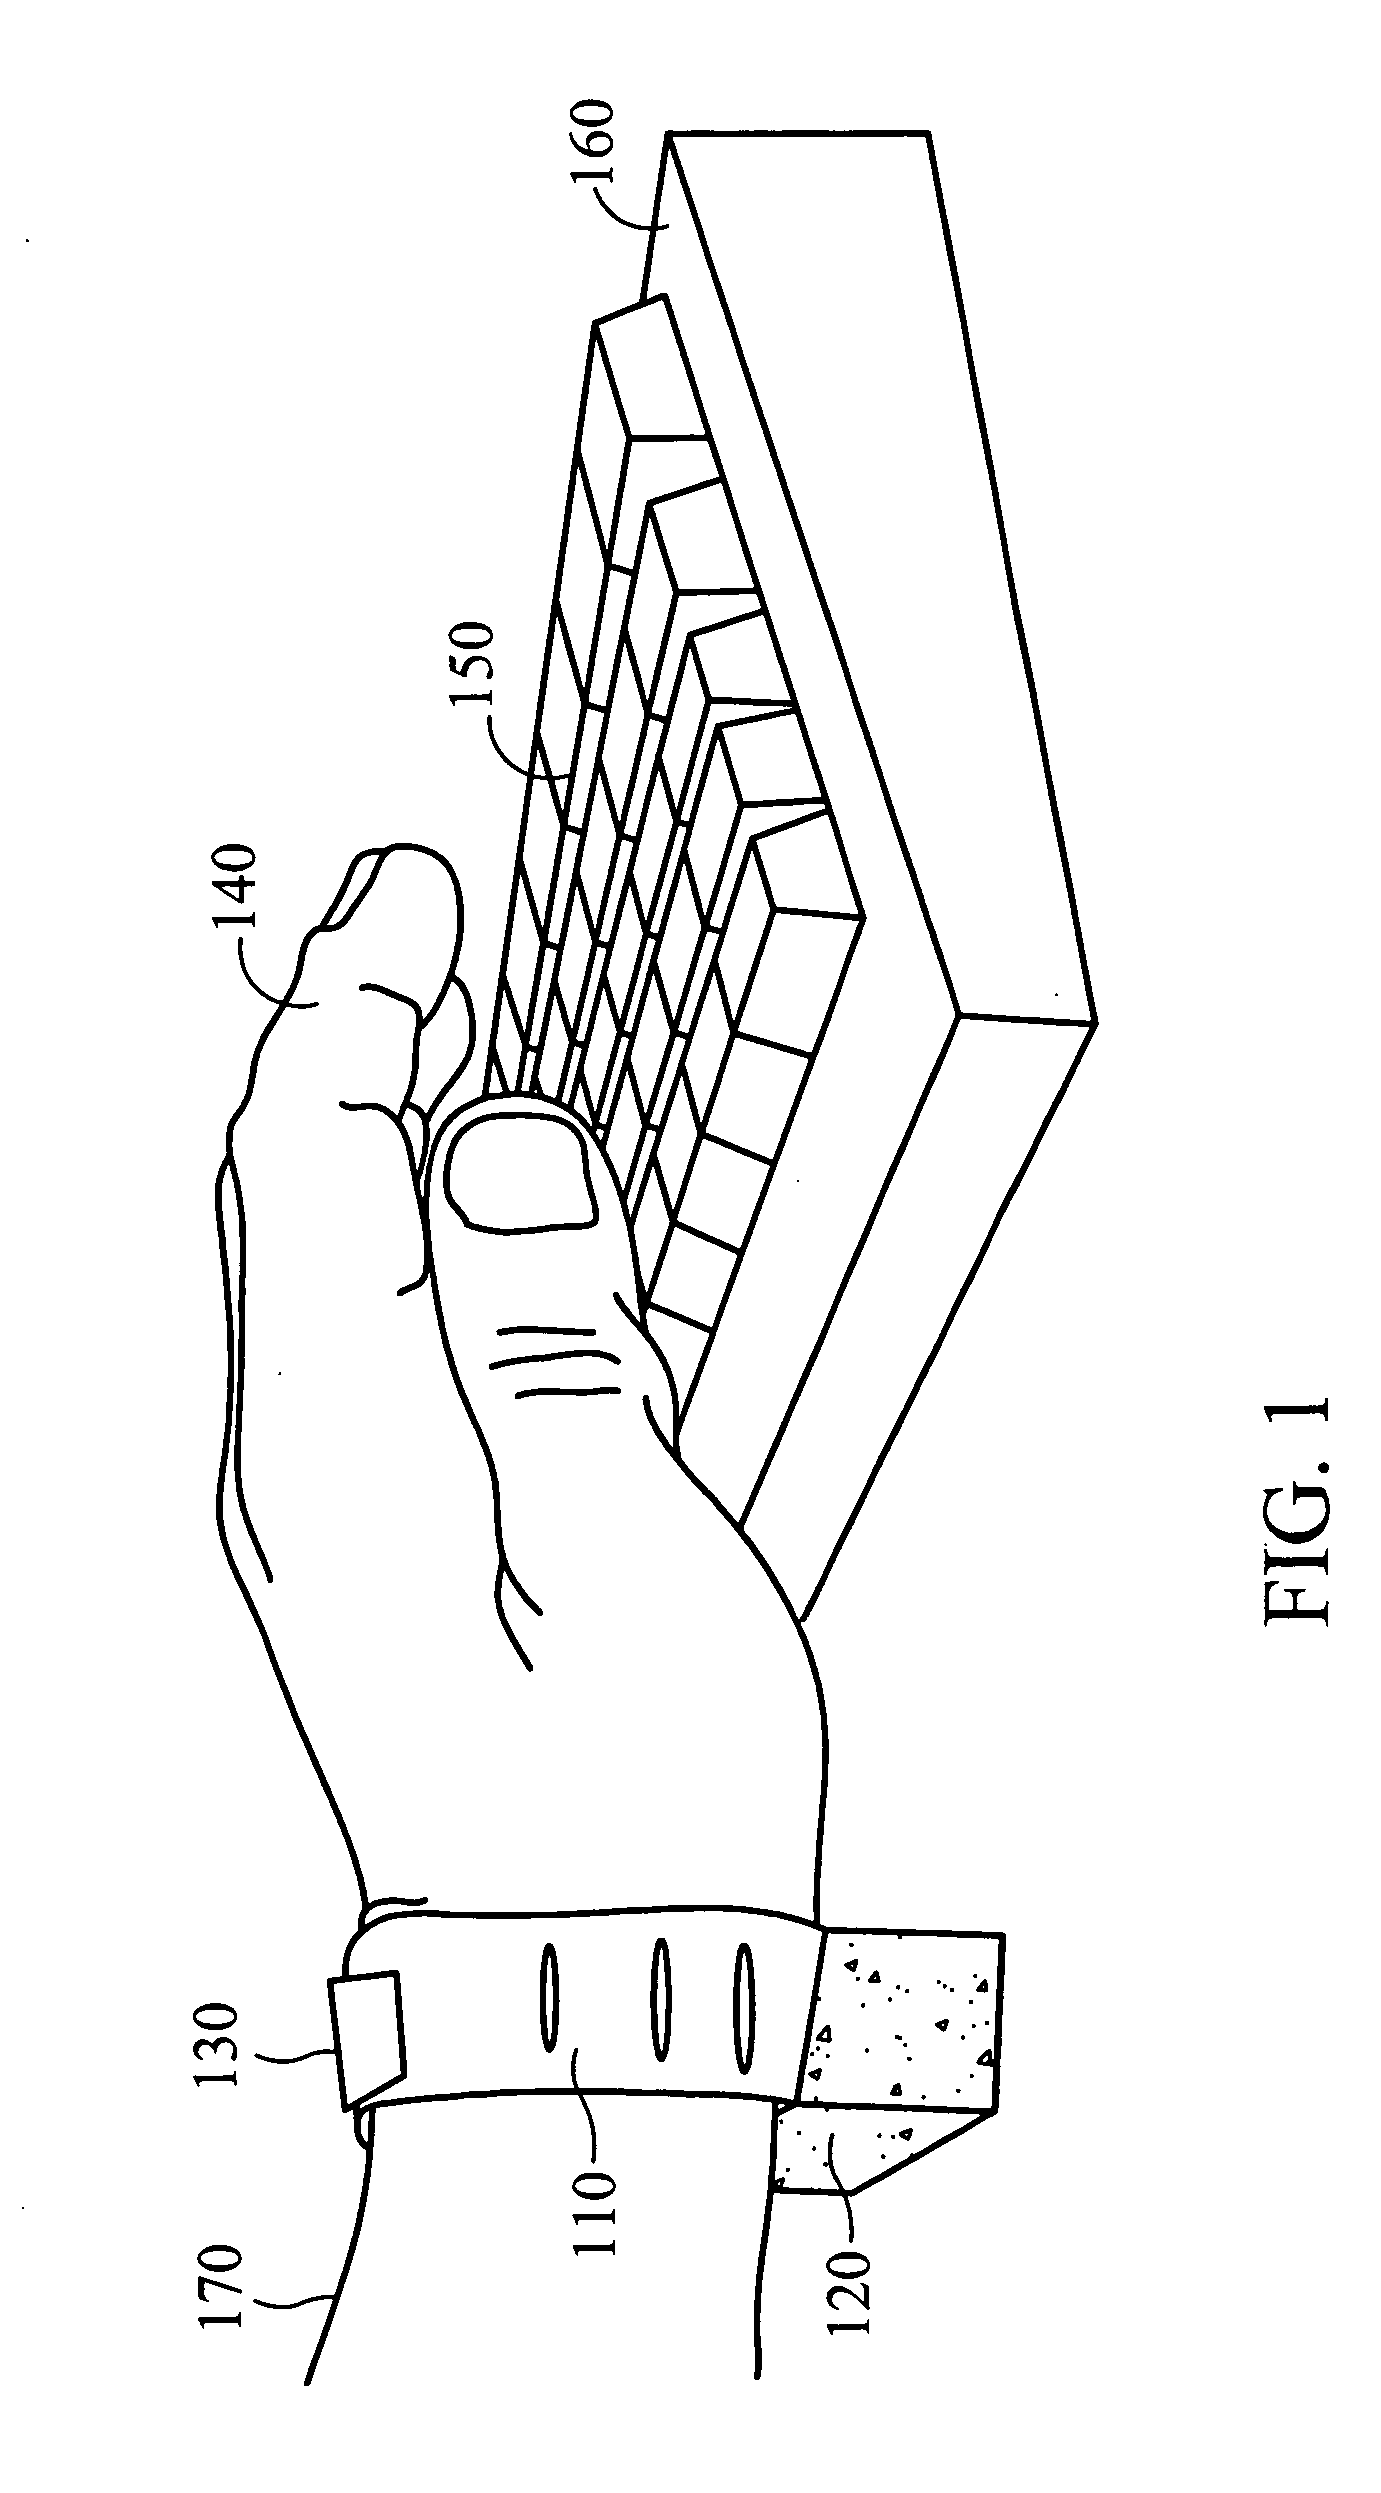 Wristband for keyboard and mouse use